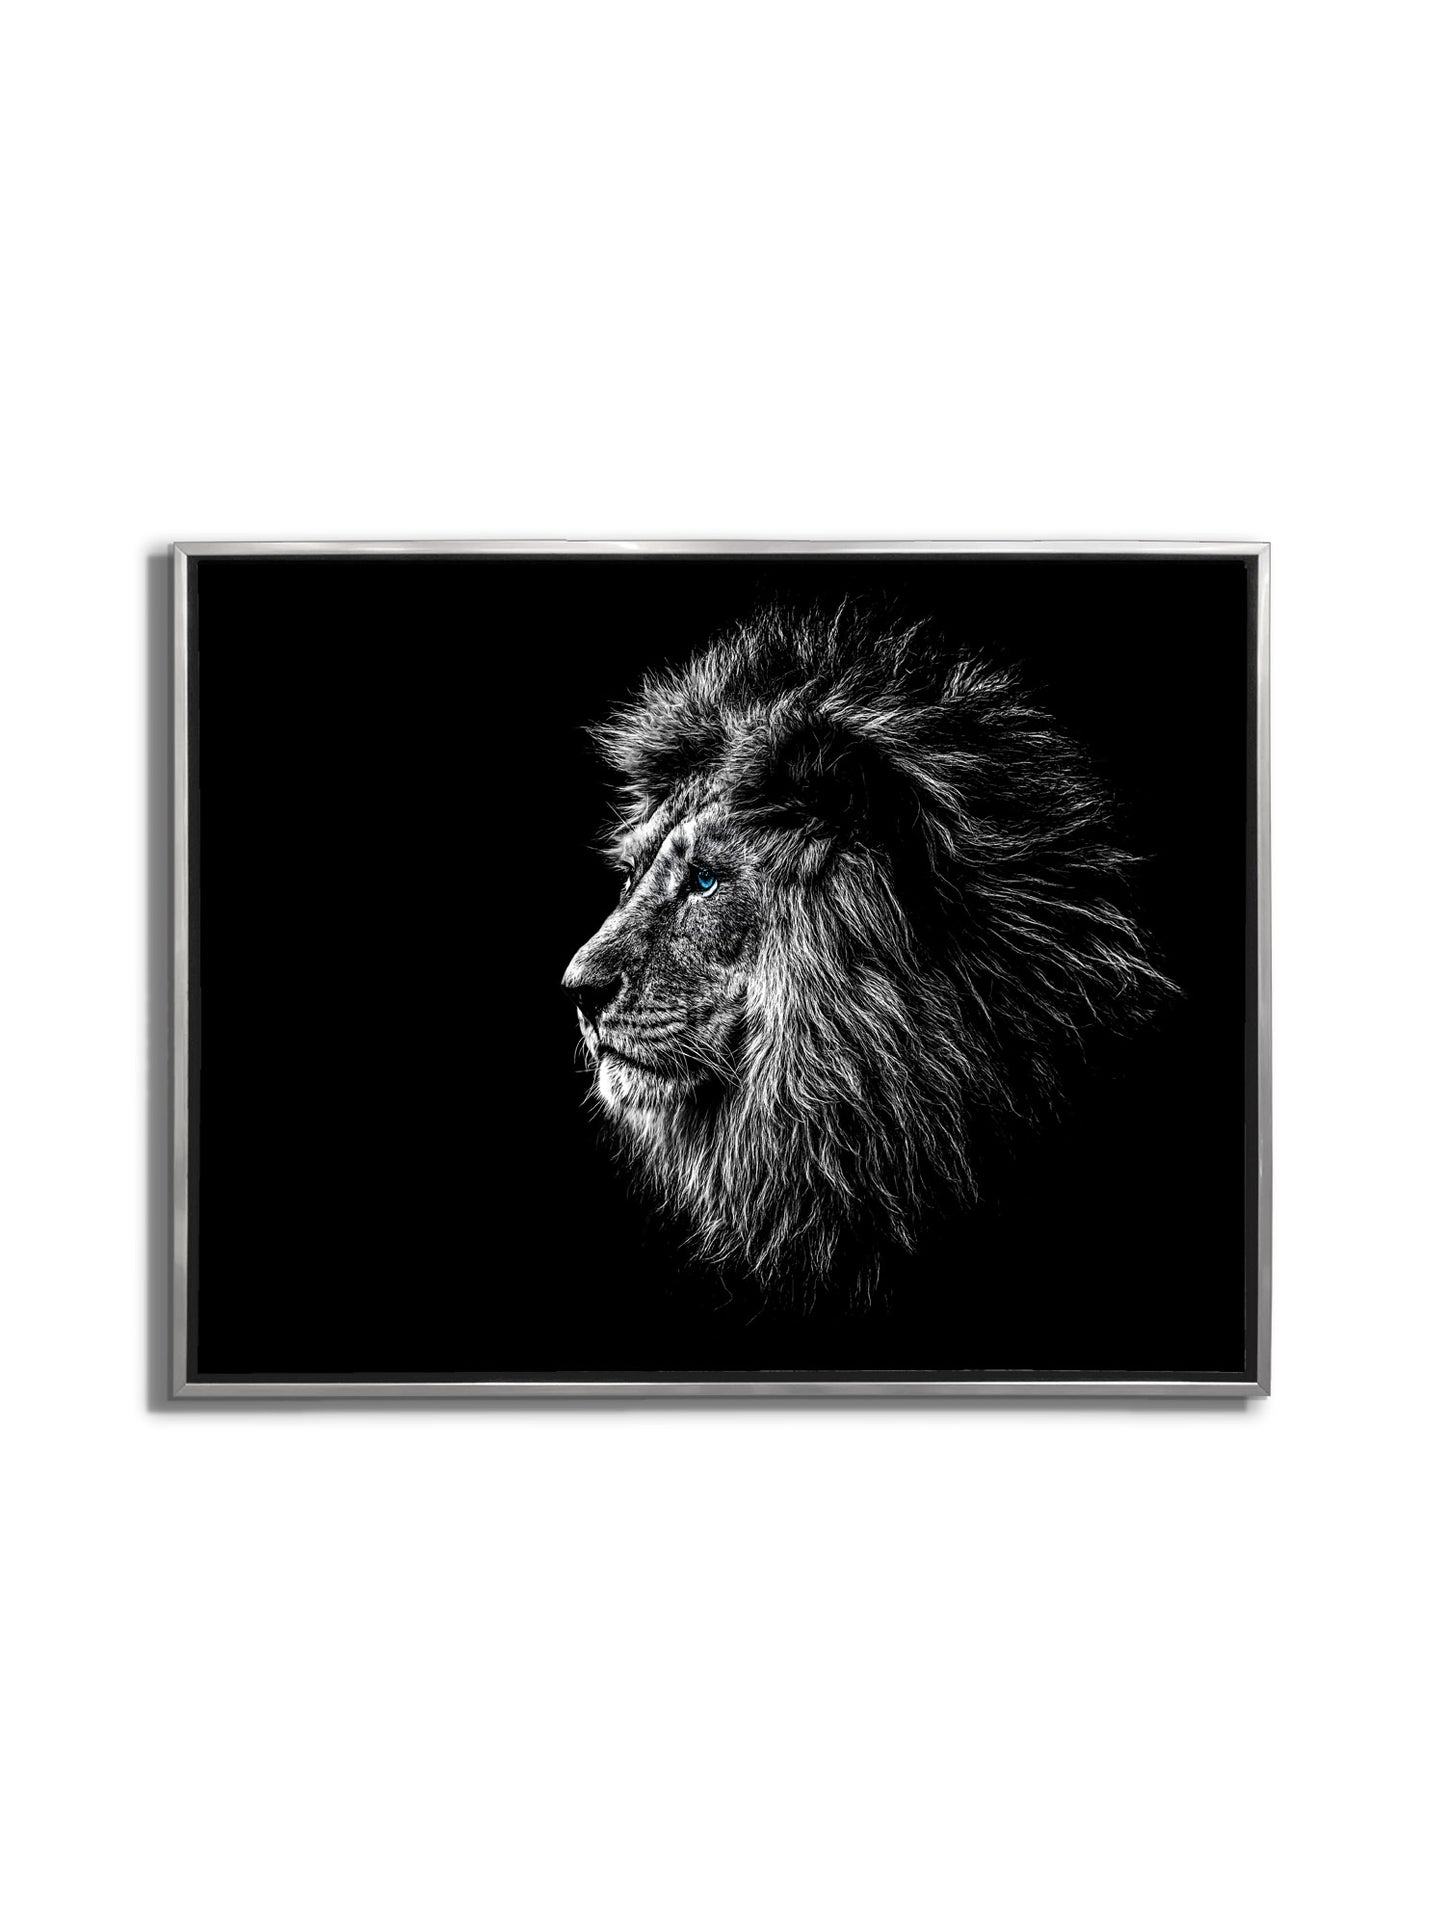 Wildlife Canvas Art-Lions Head Blue Eye in Black and White -Silver varnish